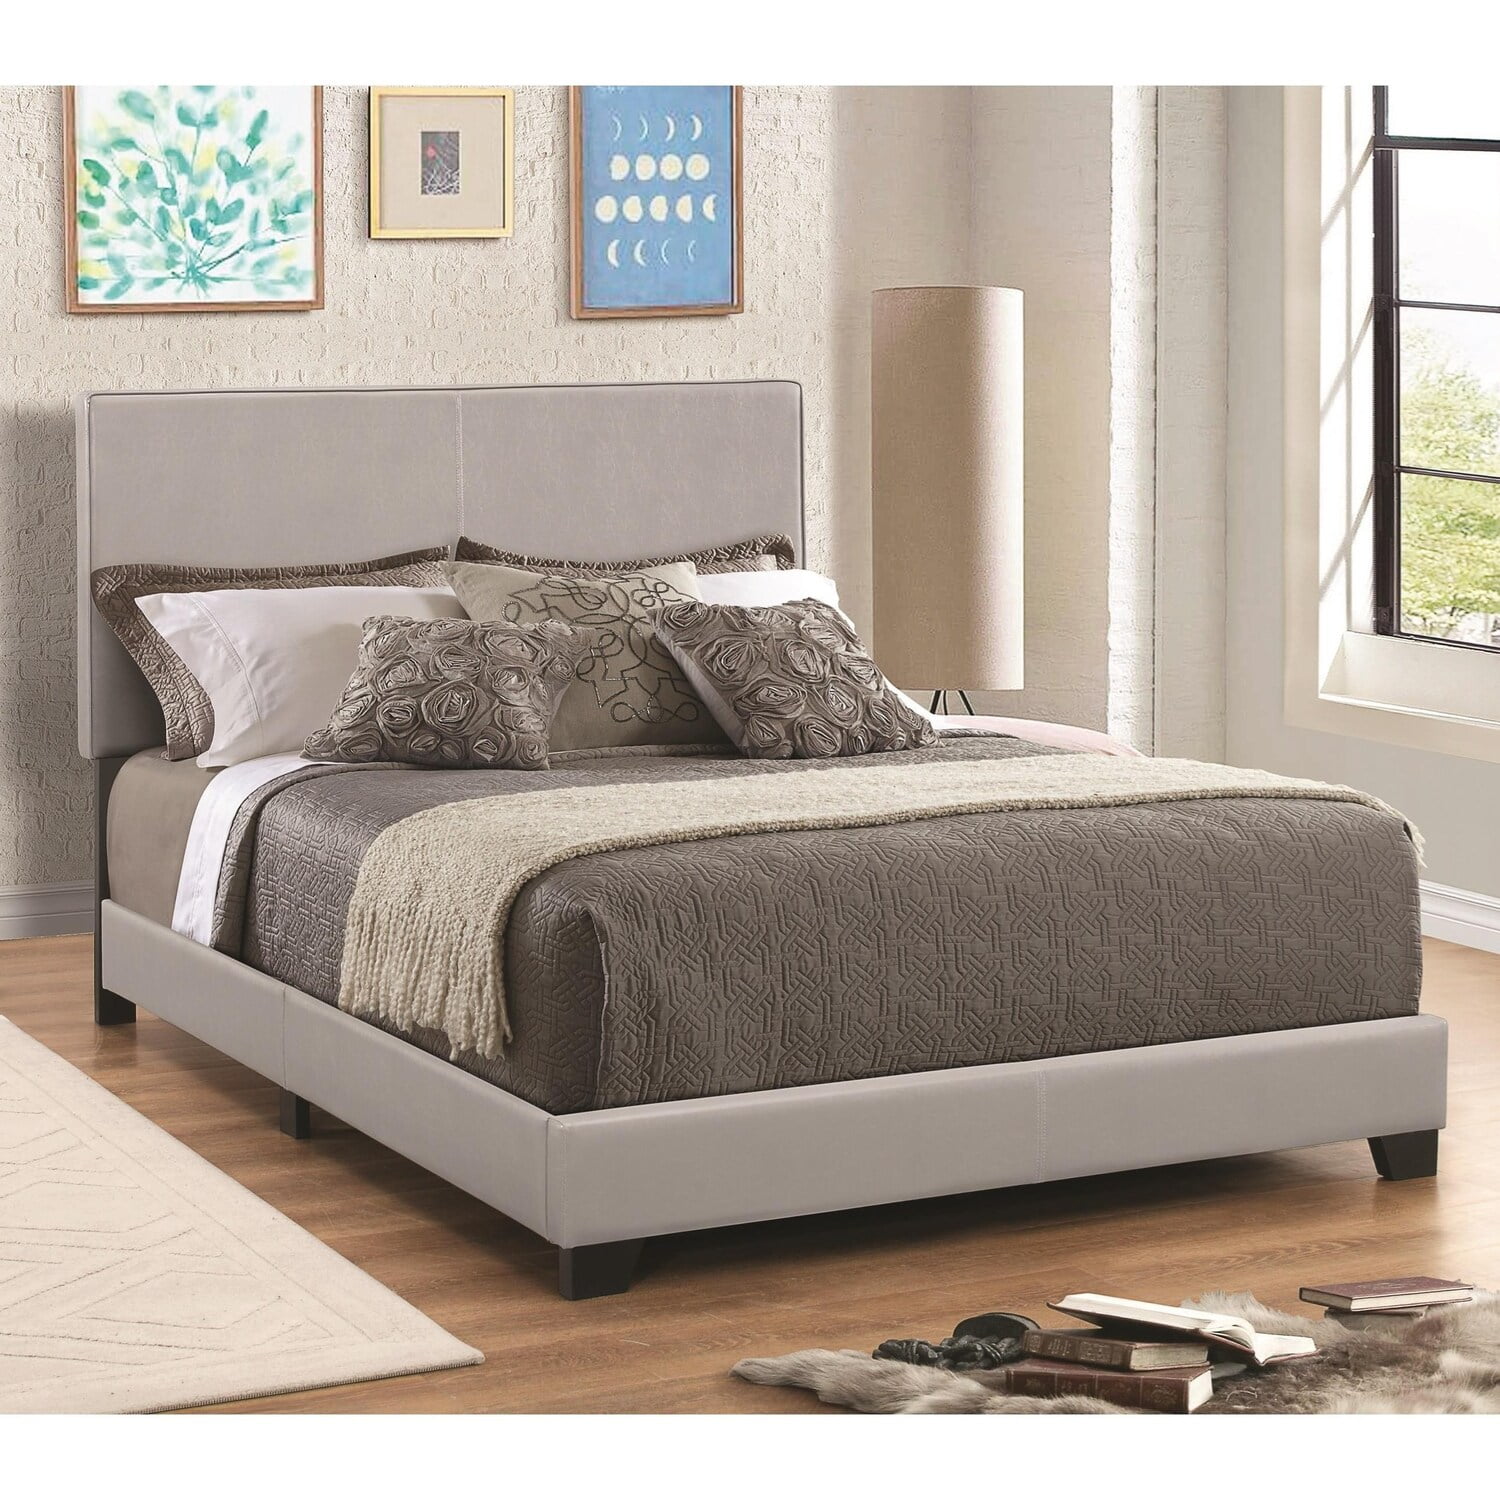 Benzara Leather Upholstered California, California Bed Size King